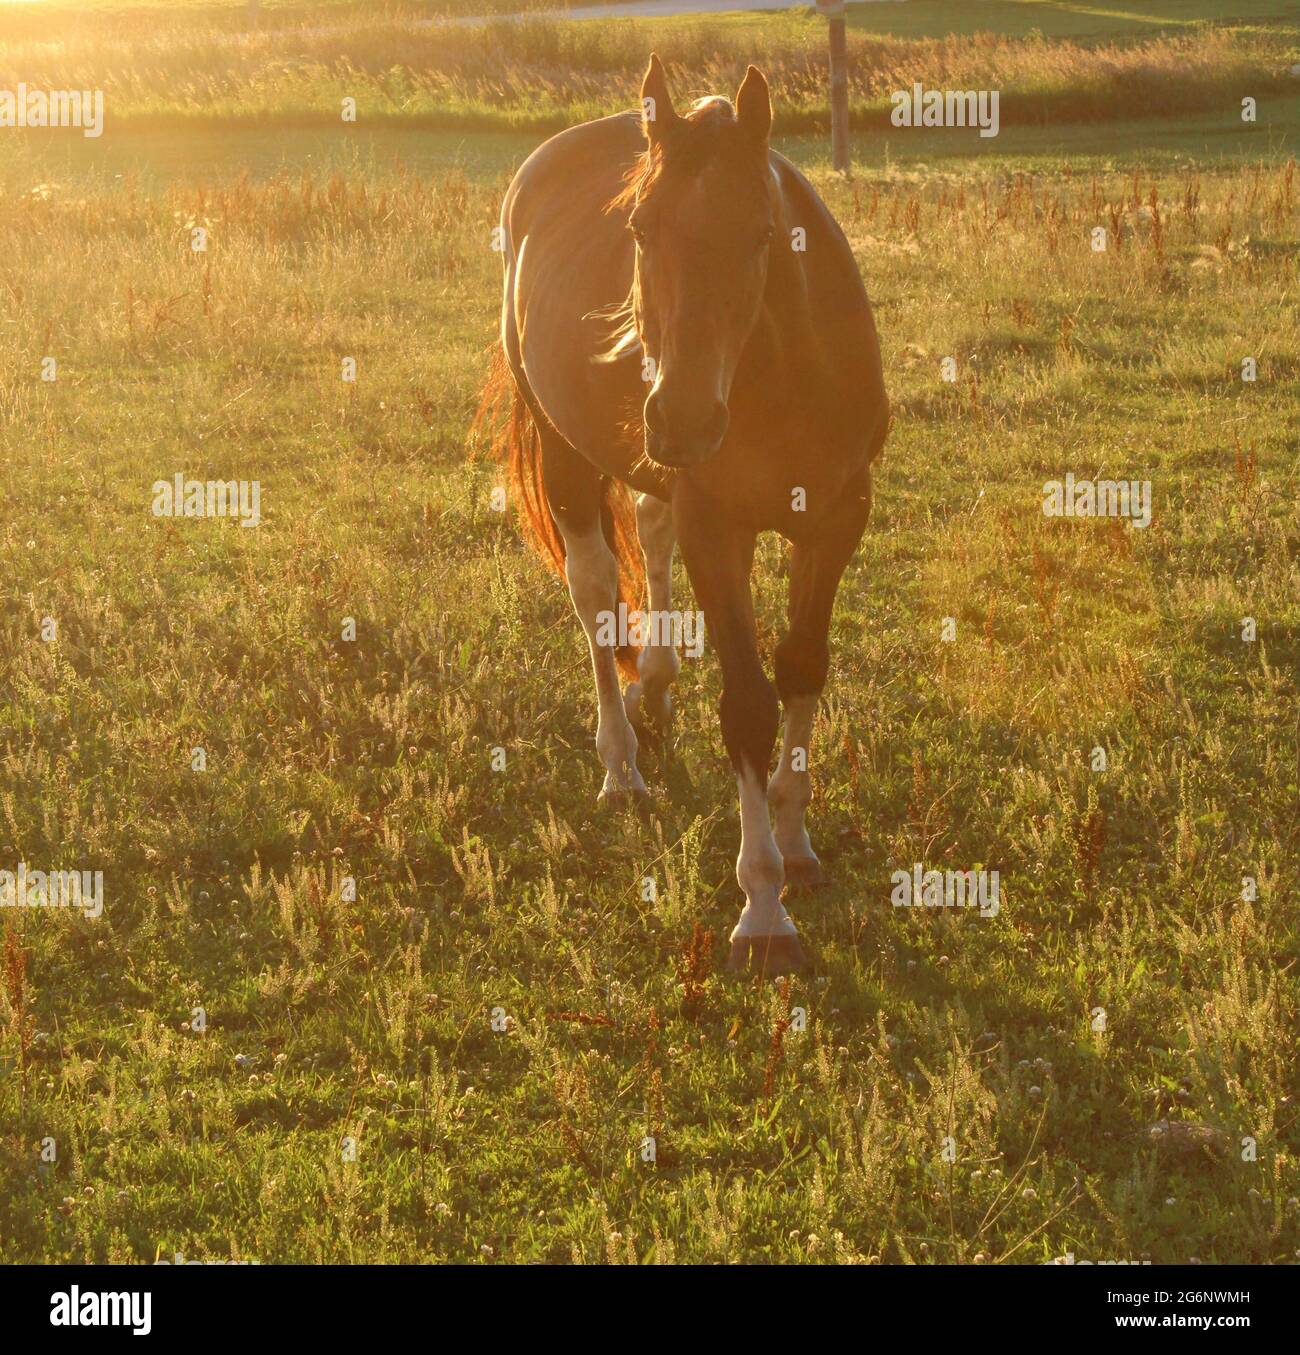 Horse walking towards the camera during the golden hour. Stock Photo